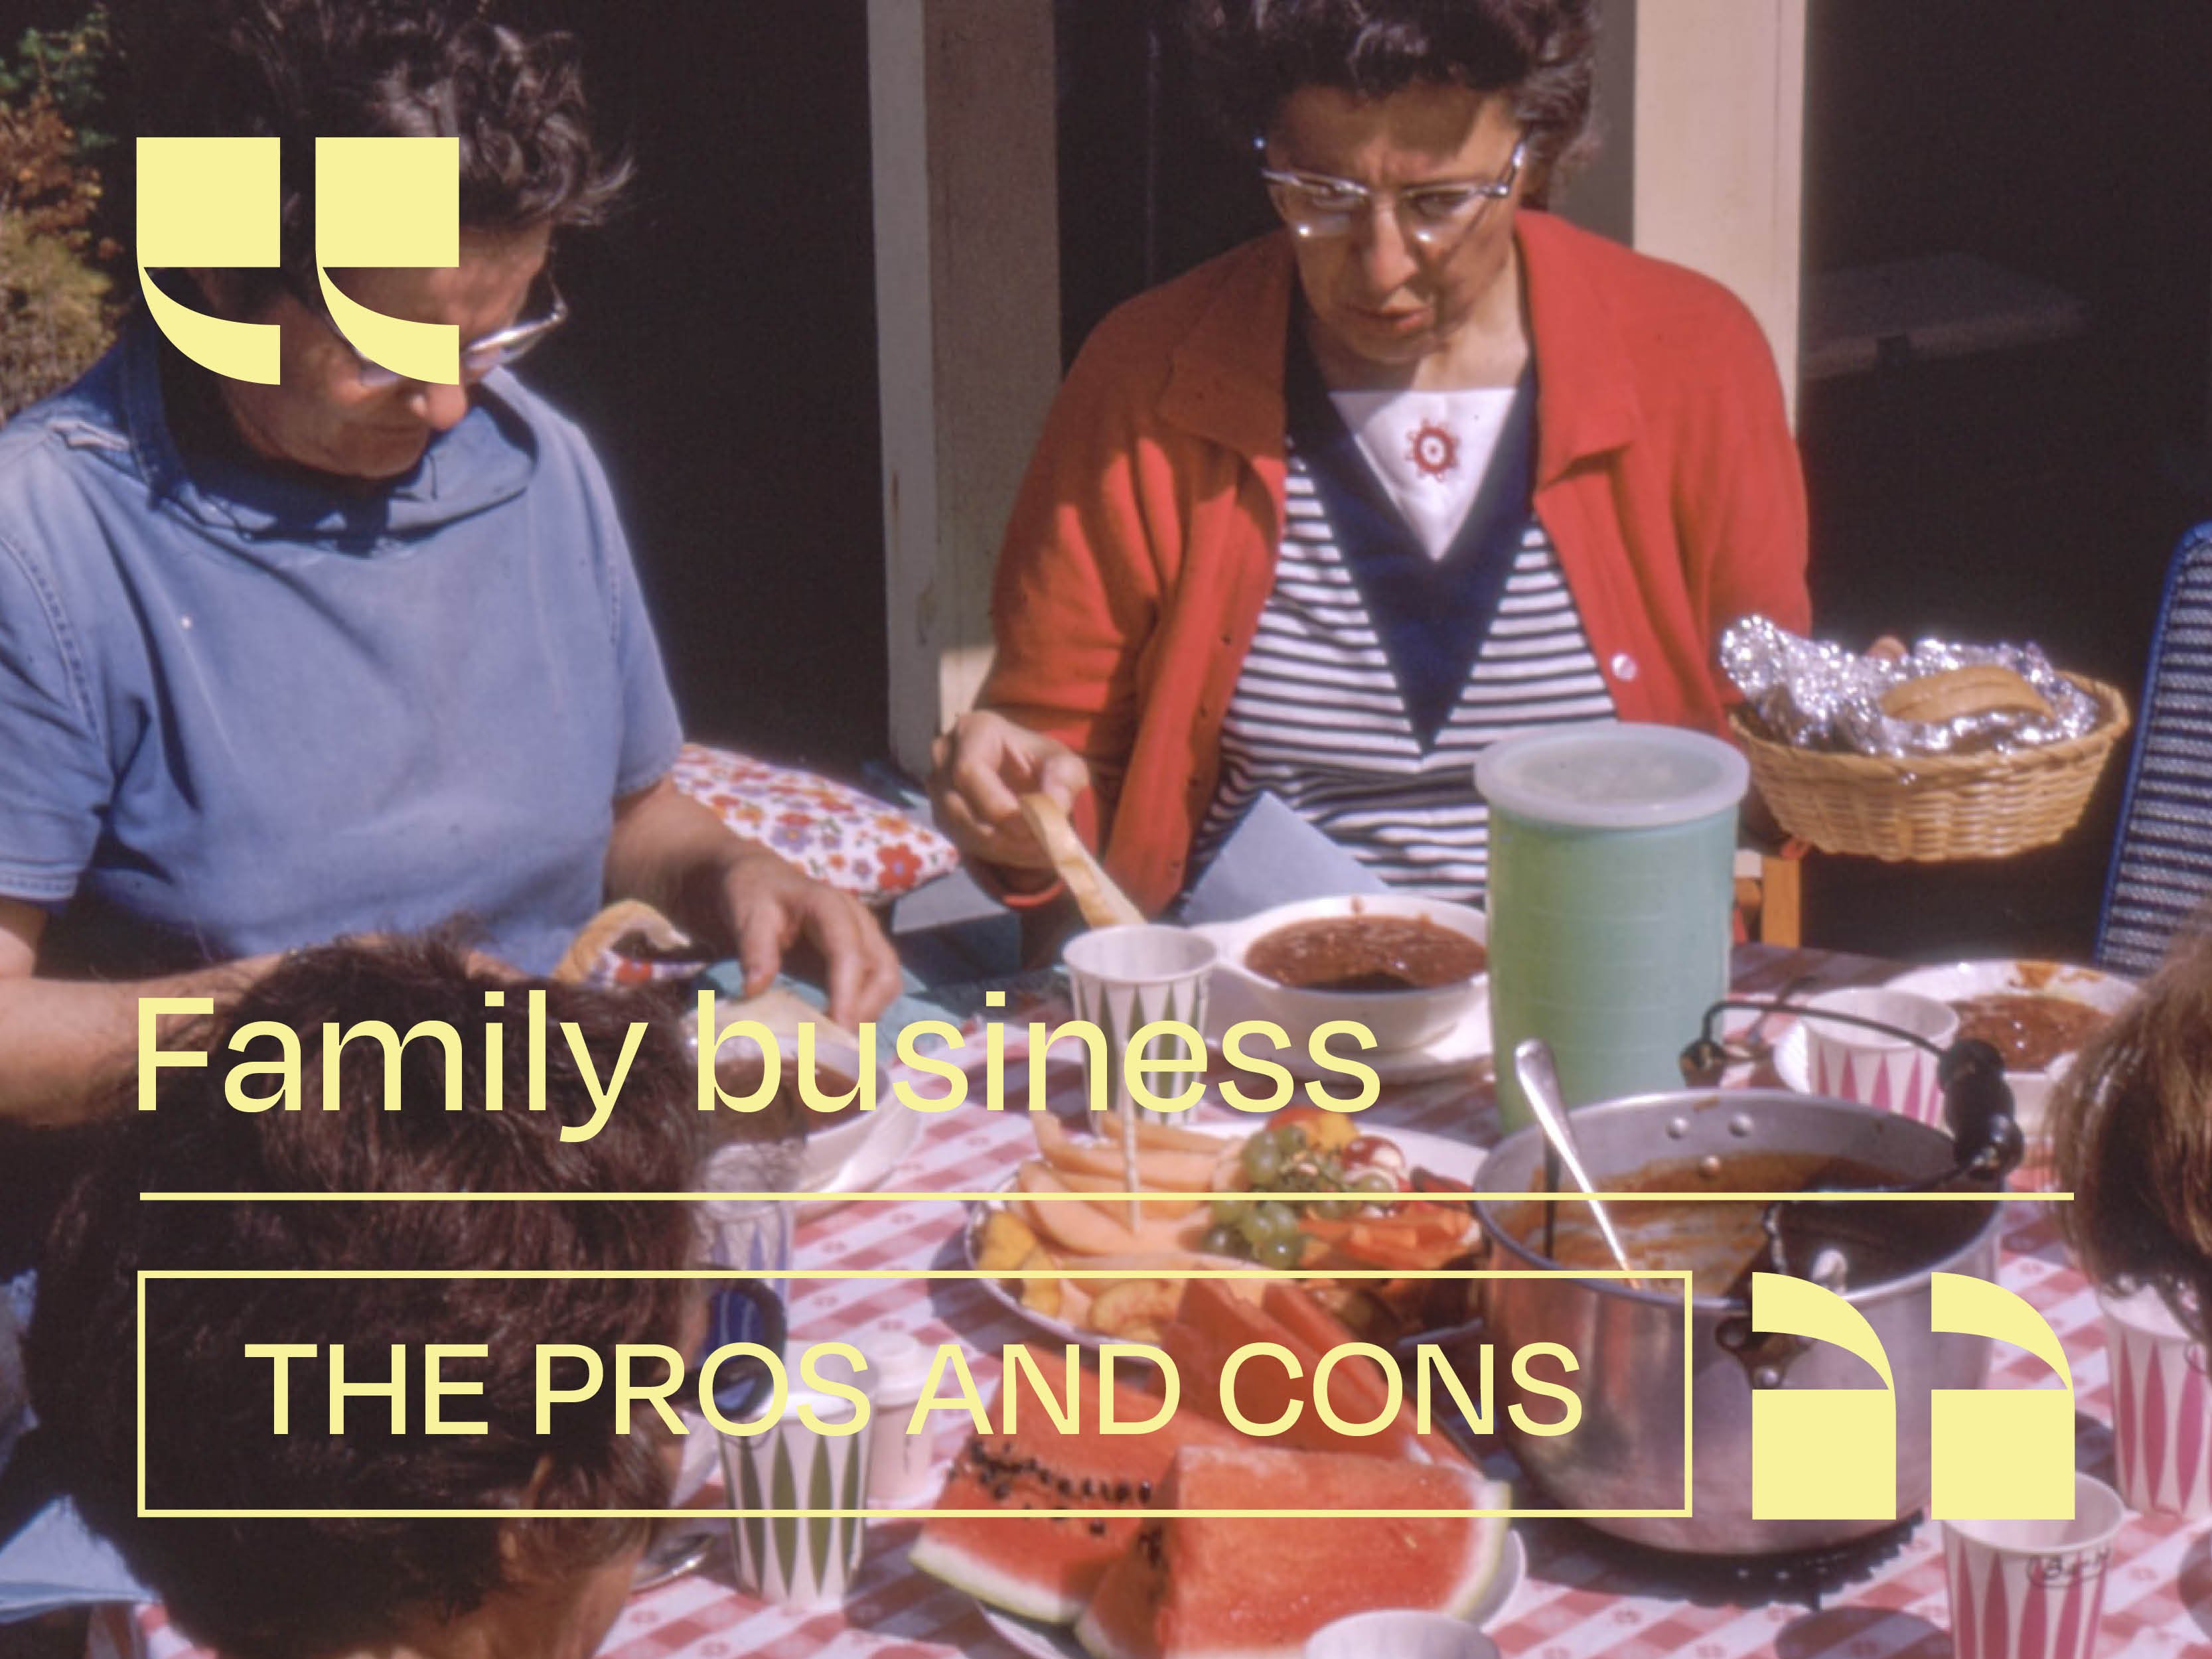 Family-owned restaurants have pros and cons.